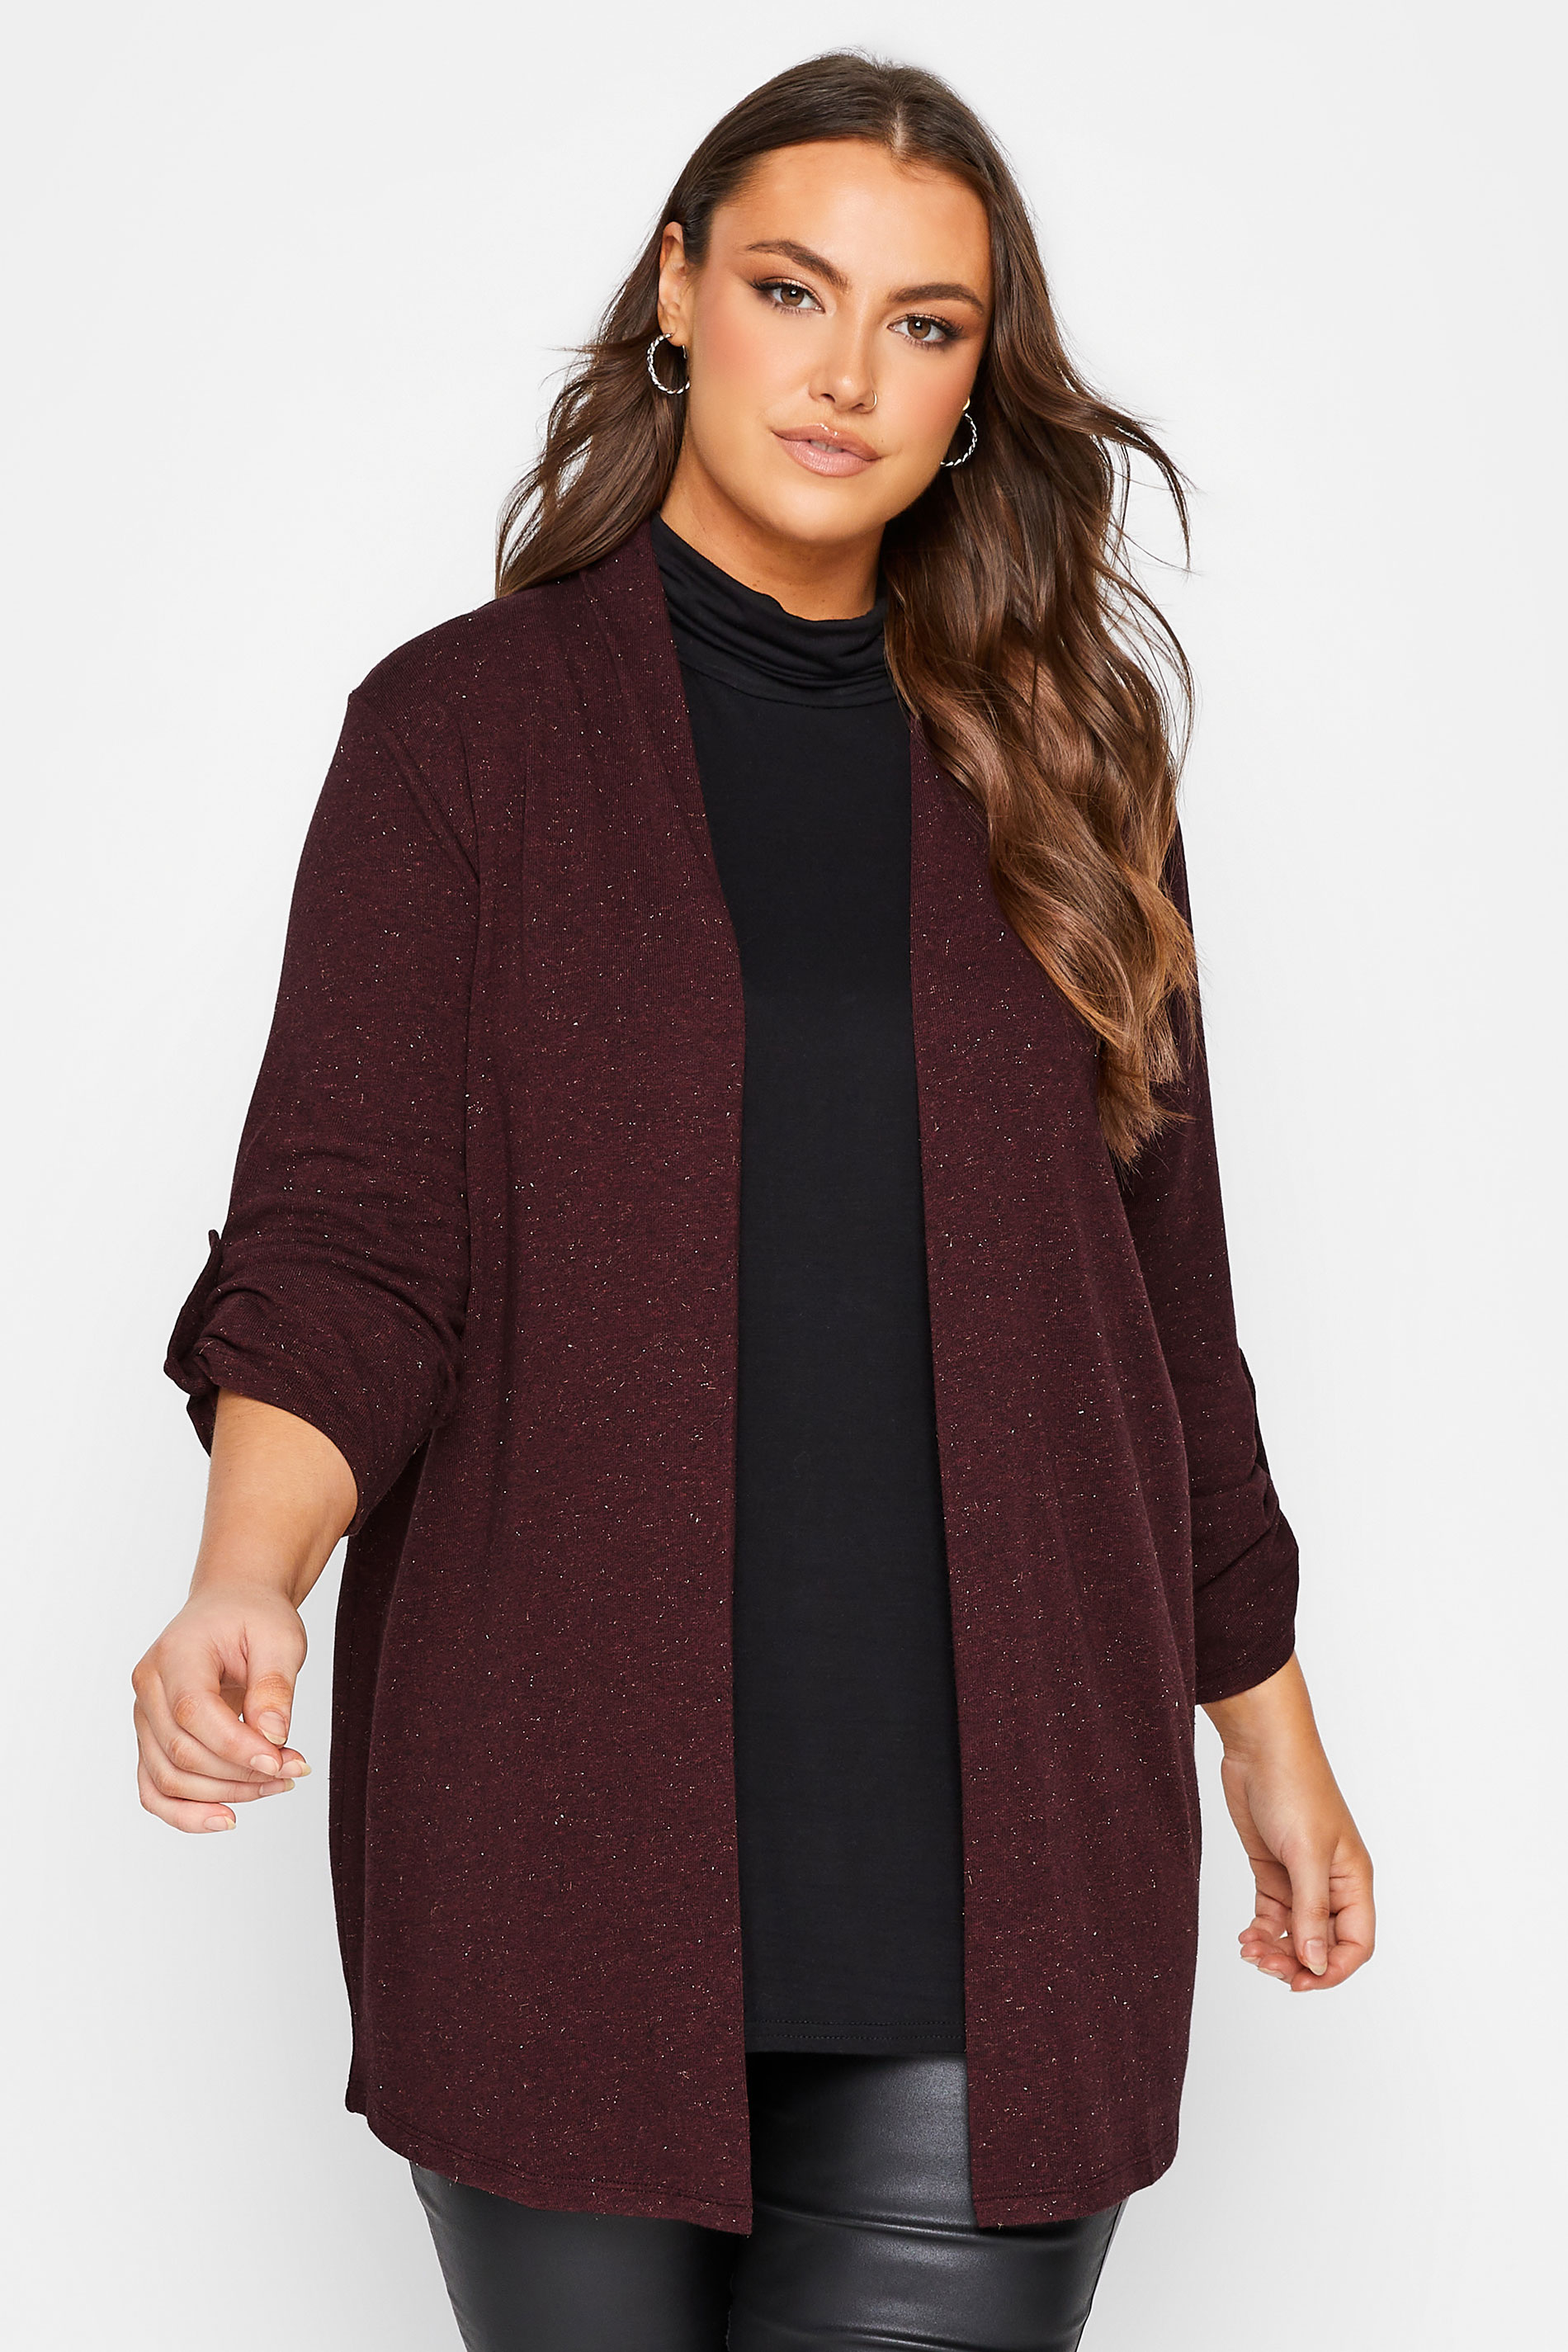 YOURS LUXURY Plus Size Burgundy Red Metallic Cardigan | Yours Clothing 1